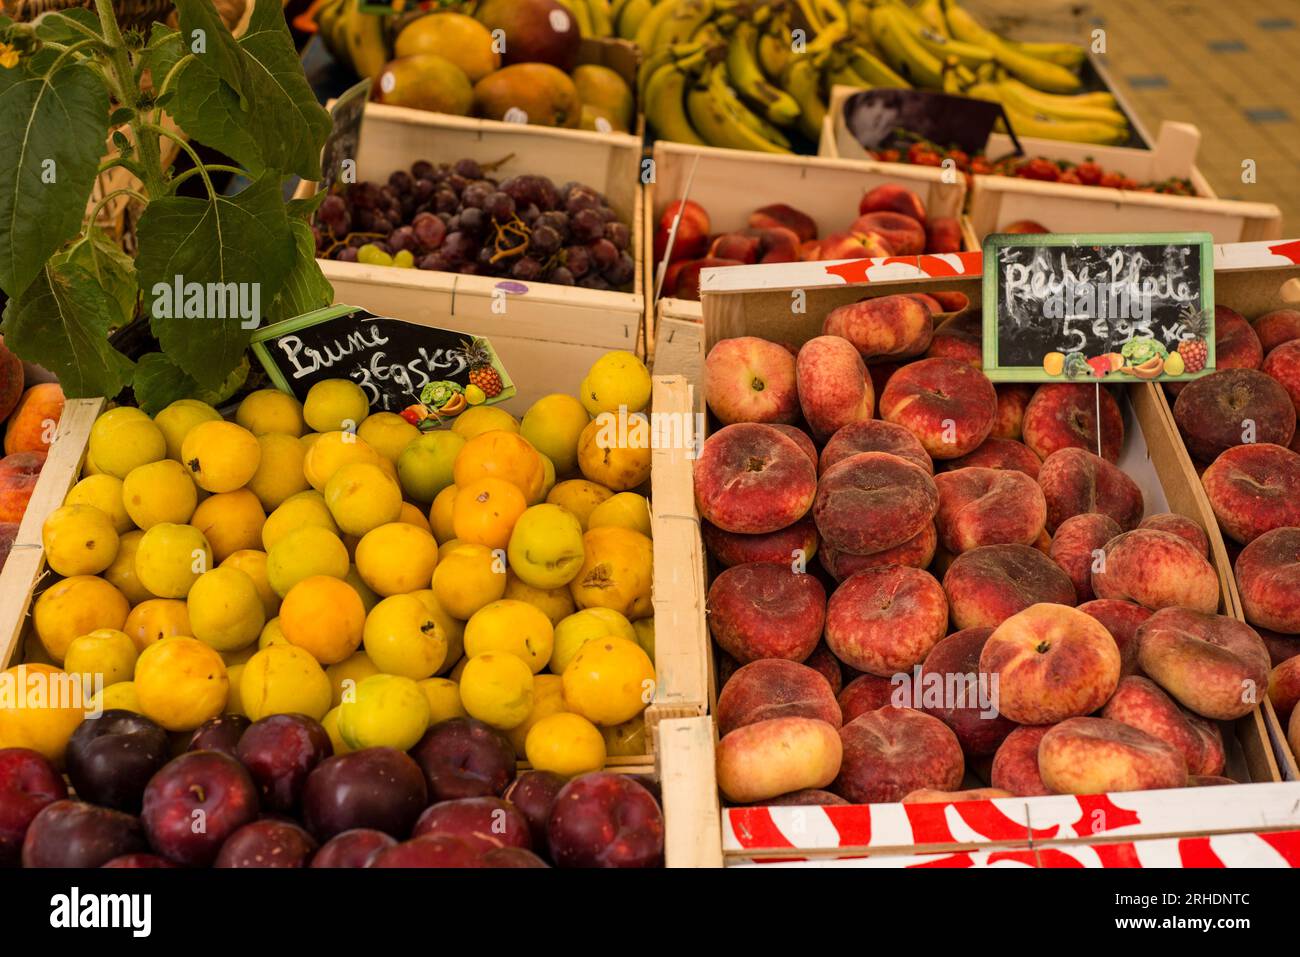 Grocery shop for fruits and vegetables, Sete, Herault, Occitanie, France Stock Photo